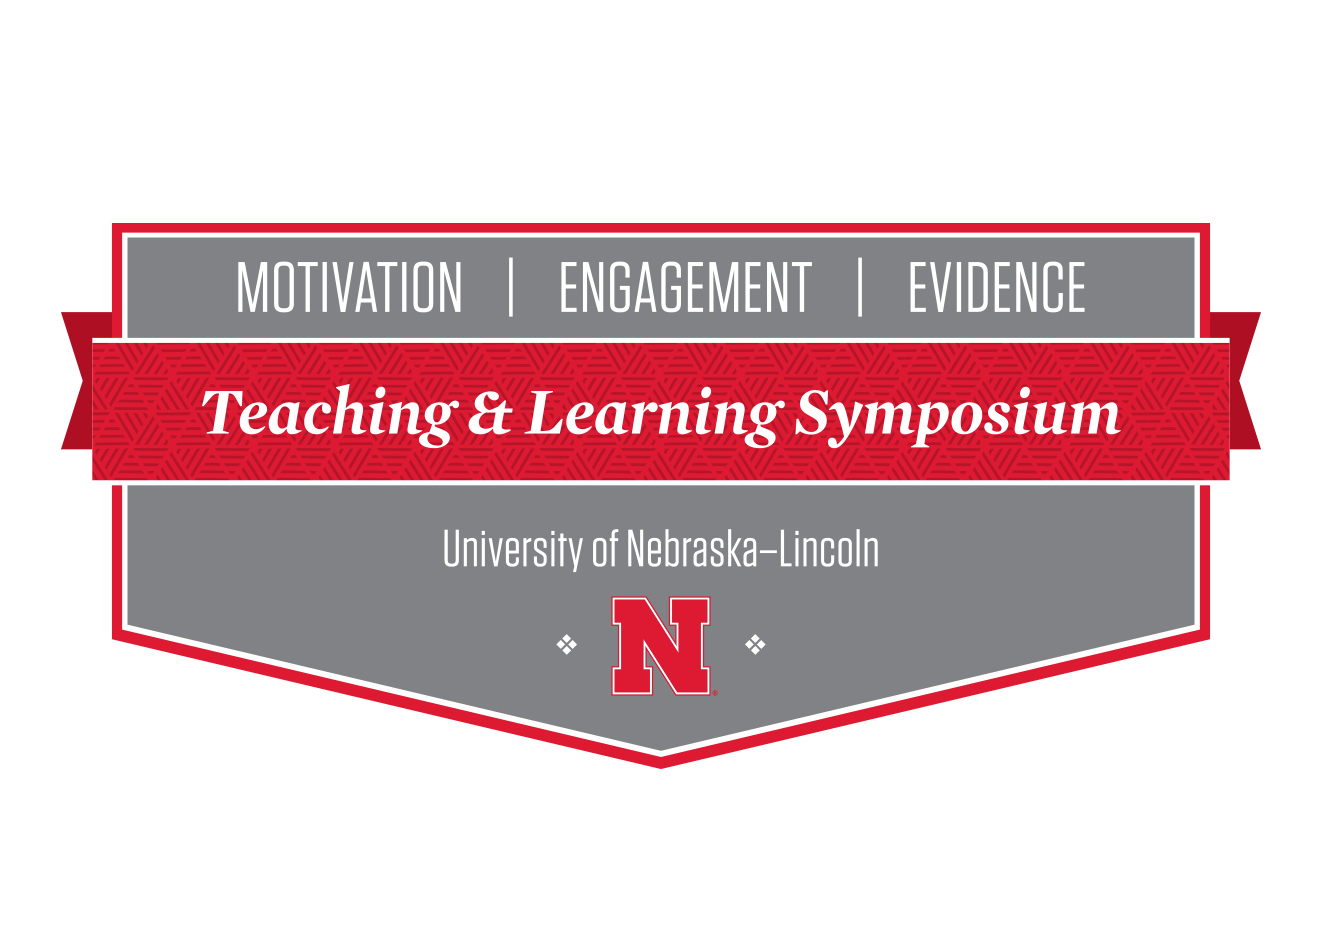 Teaching and learning symposium on Feb. 28